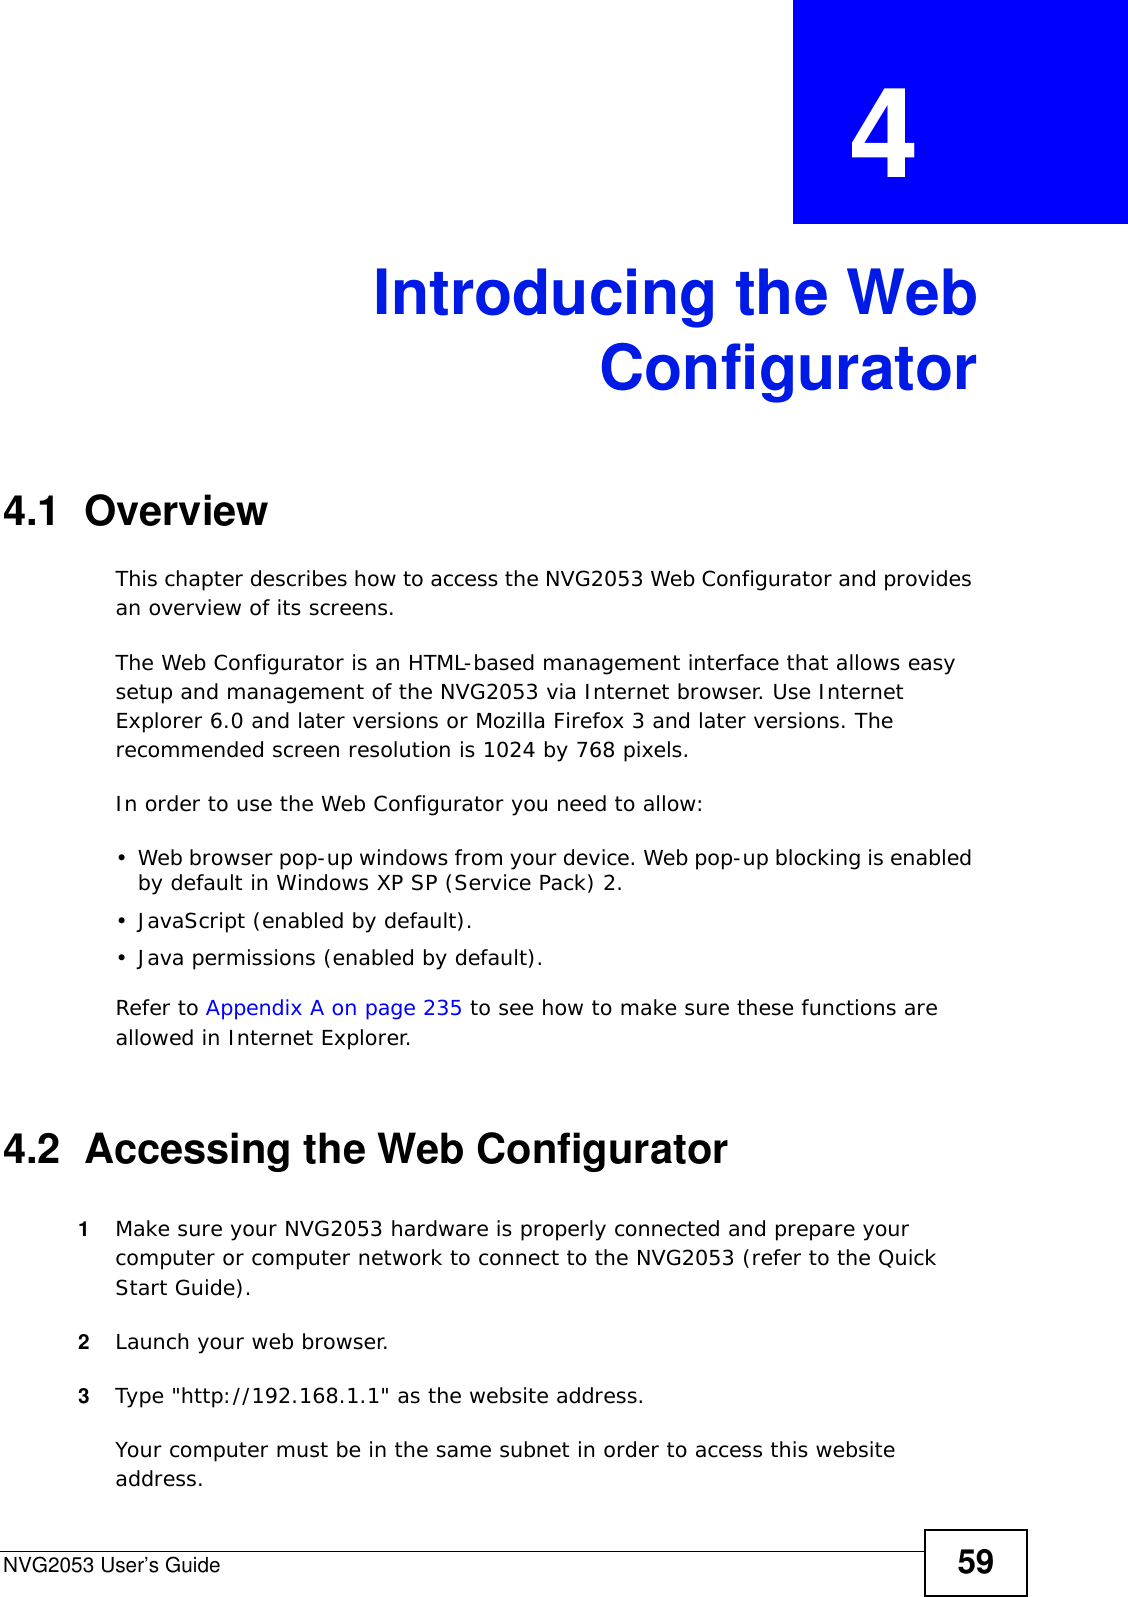 NVG2053 User’s Guide 59CHAPTER  4 Introducing the WebConfigurator4.1  OverviewThis chapter describes how to access the NVG2053 Web Configurator and provides an overview of its screens.The Web Configurator is an HTML-based management interface that allows easy setup and management of the NVG2053 via Internet browser. Use Internet Explorer 6.0 and later versions or Mozilla Firefox 3 and later versions. The recommended screen resolution is 1024 by 768 pixels.In order to use the Web Configurator you need to allow:• Web browser pop-up windows from your device. Web pop-up blocking is enabled by default in Windows XP SP (Service Pack) 2.• JavaScript (enabled by default).• Java permissions (enabled by default).Refer to Appendix A on page 235 to see how to make sure these functions are allowed in Internet Explorer.4.2  Accessing the Web Configurator1Make sure your NVG2053 hardware is properly connected and prepare your computer or computer network to connect to the NVG2053 (refer to the Quick Start Guide).2Launch your web browser.3Type &quot;http://192.168.1.1&quot; as the website address. Your computer must be in the same subnet in order to access this website address.